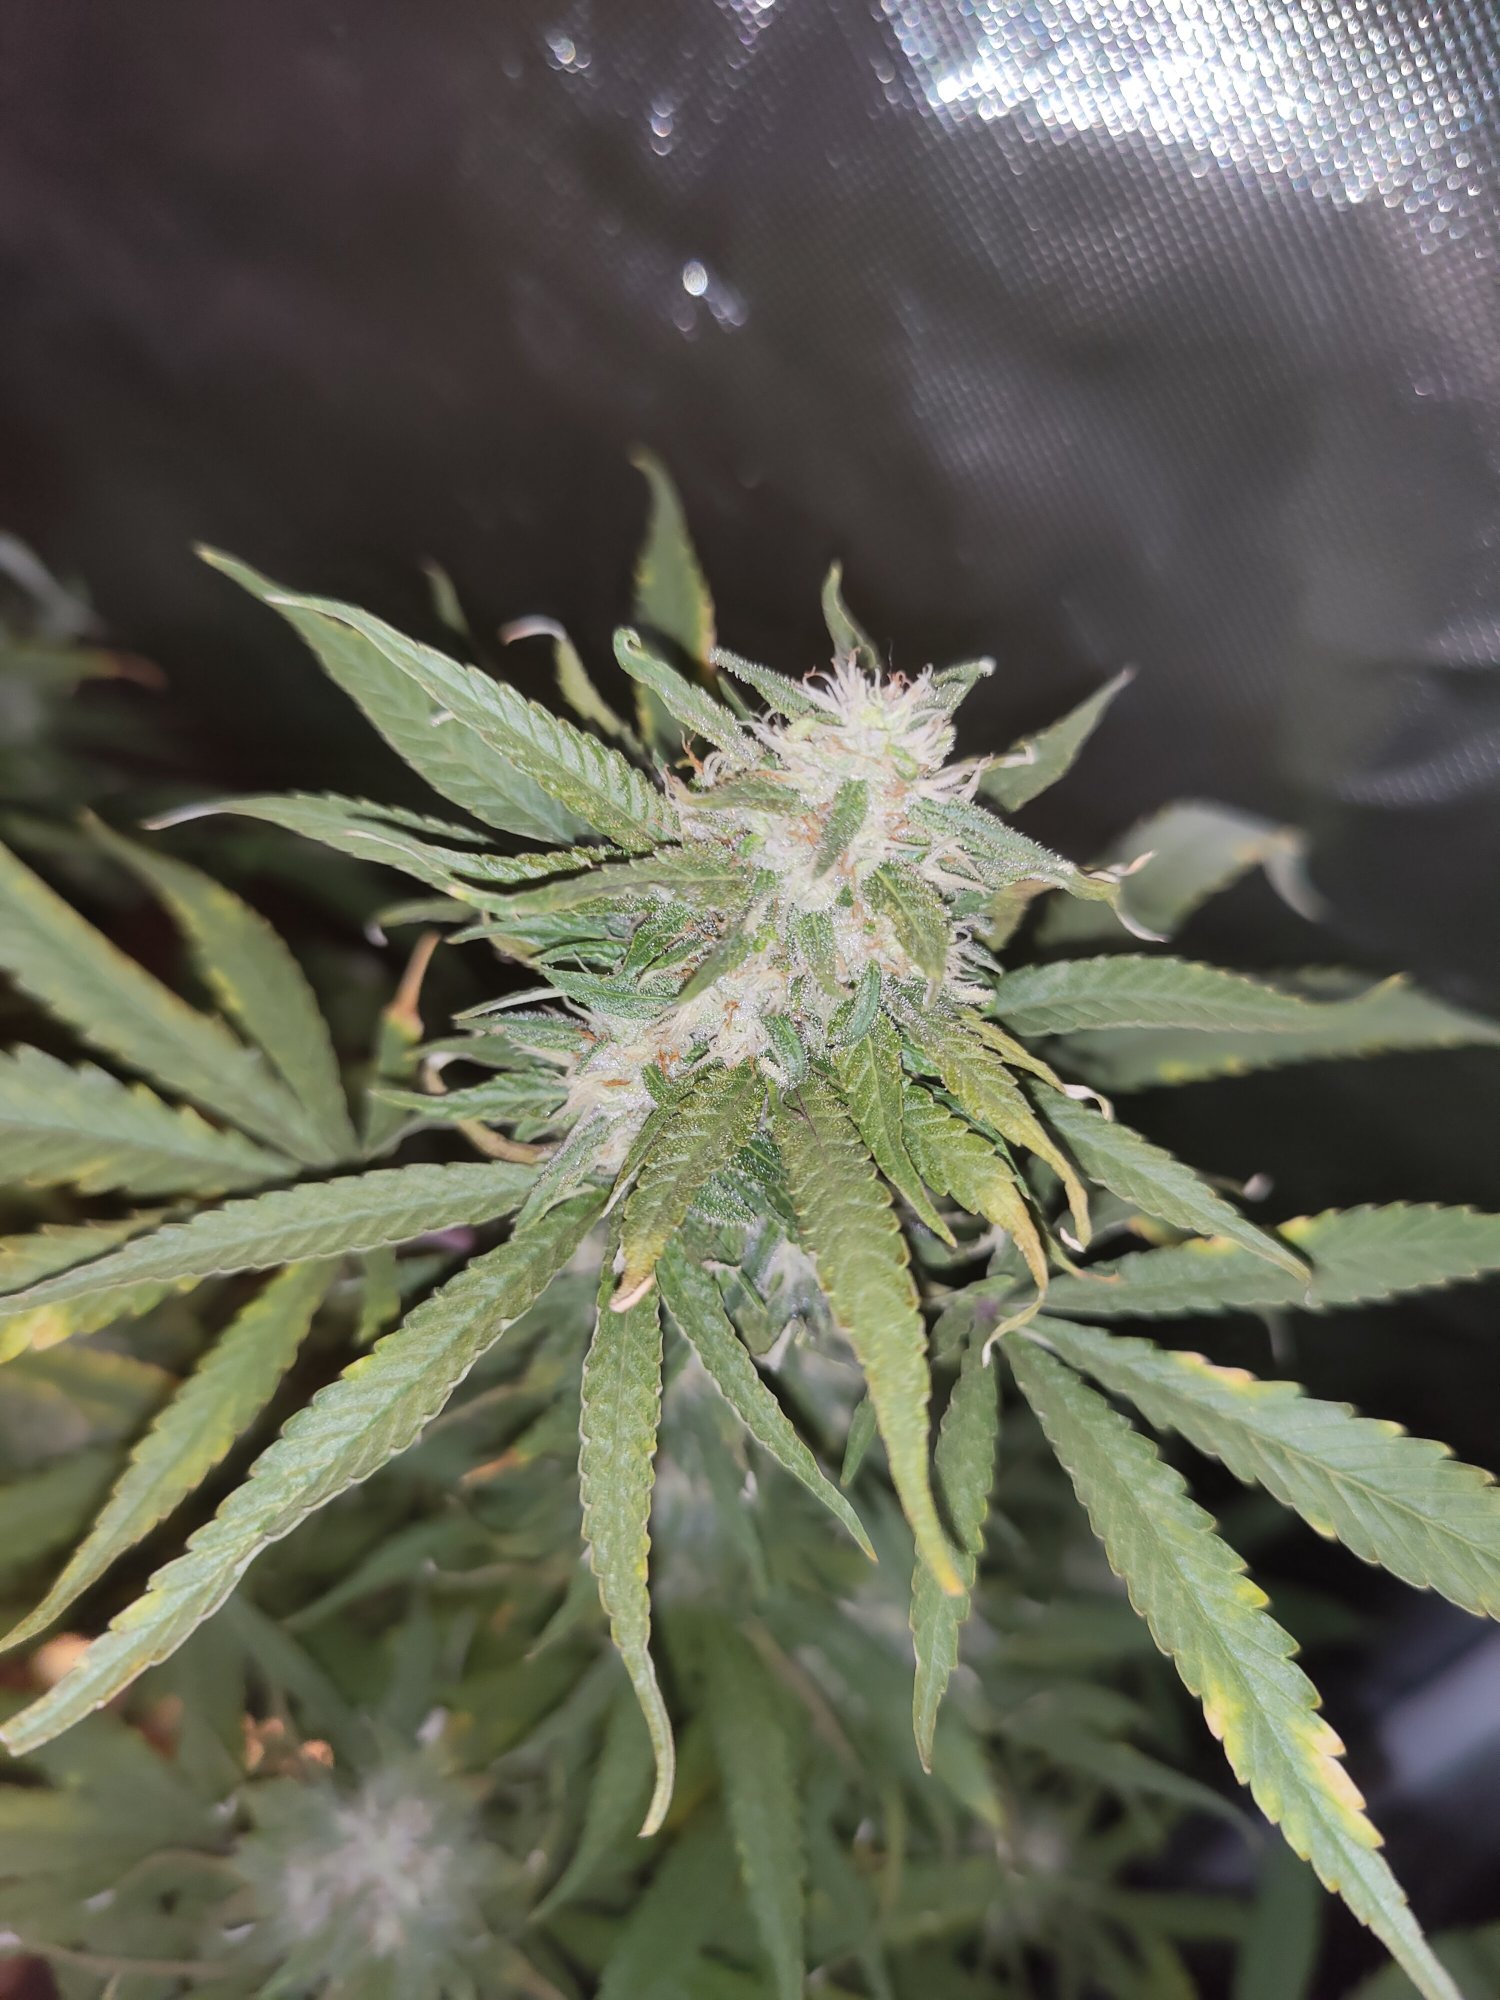 Leaves going brown and curling during flower 2